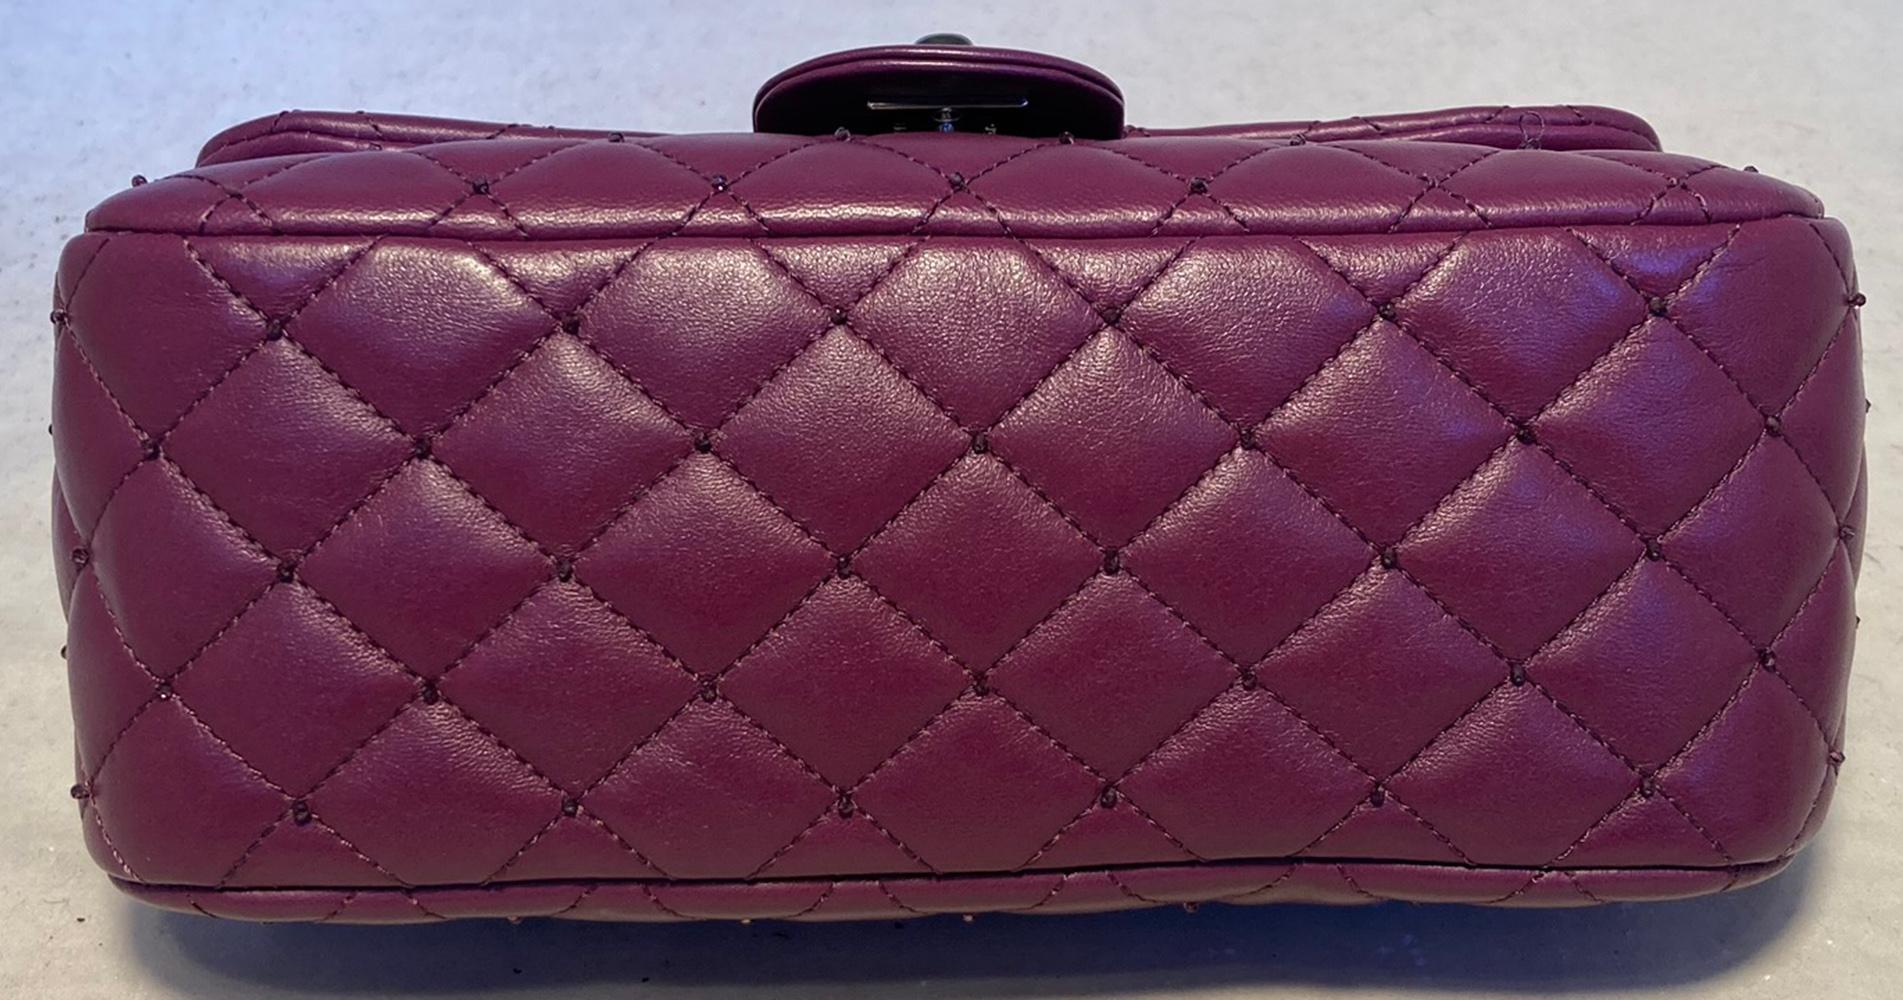 Chanel Purple Beaded Leather Classic Flap Shoulder Bag in excellent condition. Purple quilted lambskin leather exterior trimmed with silver hardware and delicate purple beads at every stitched X. Signature CC logo twist closure opens via single flap